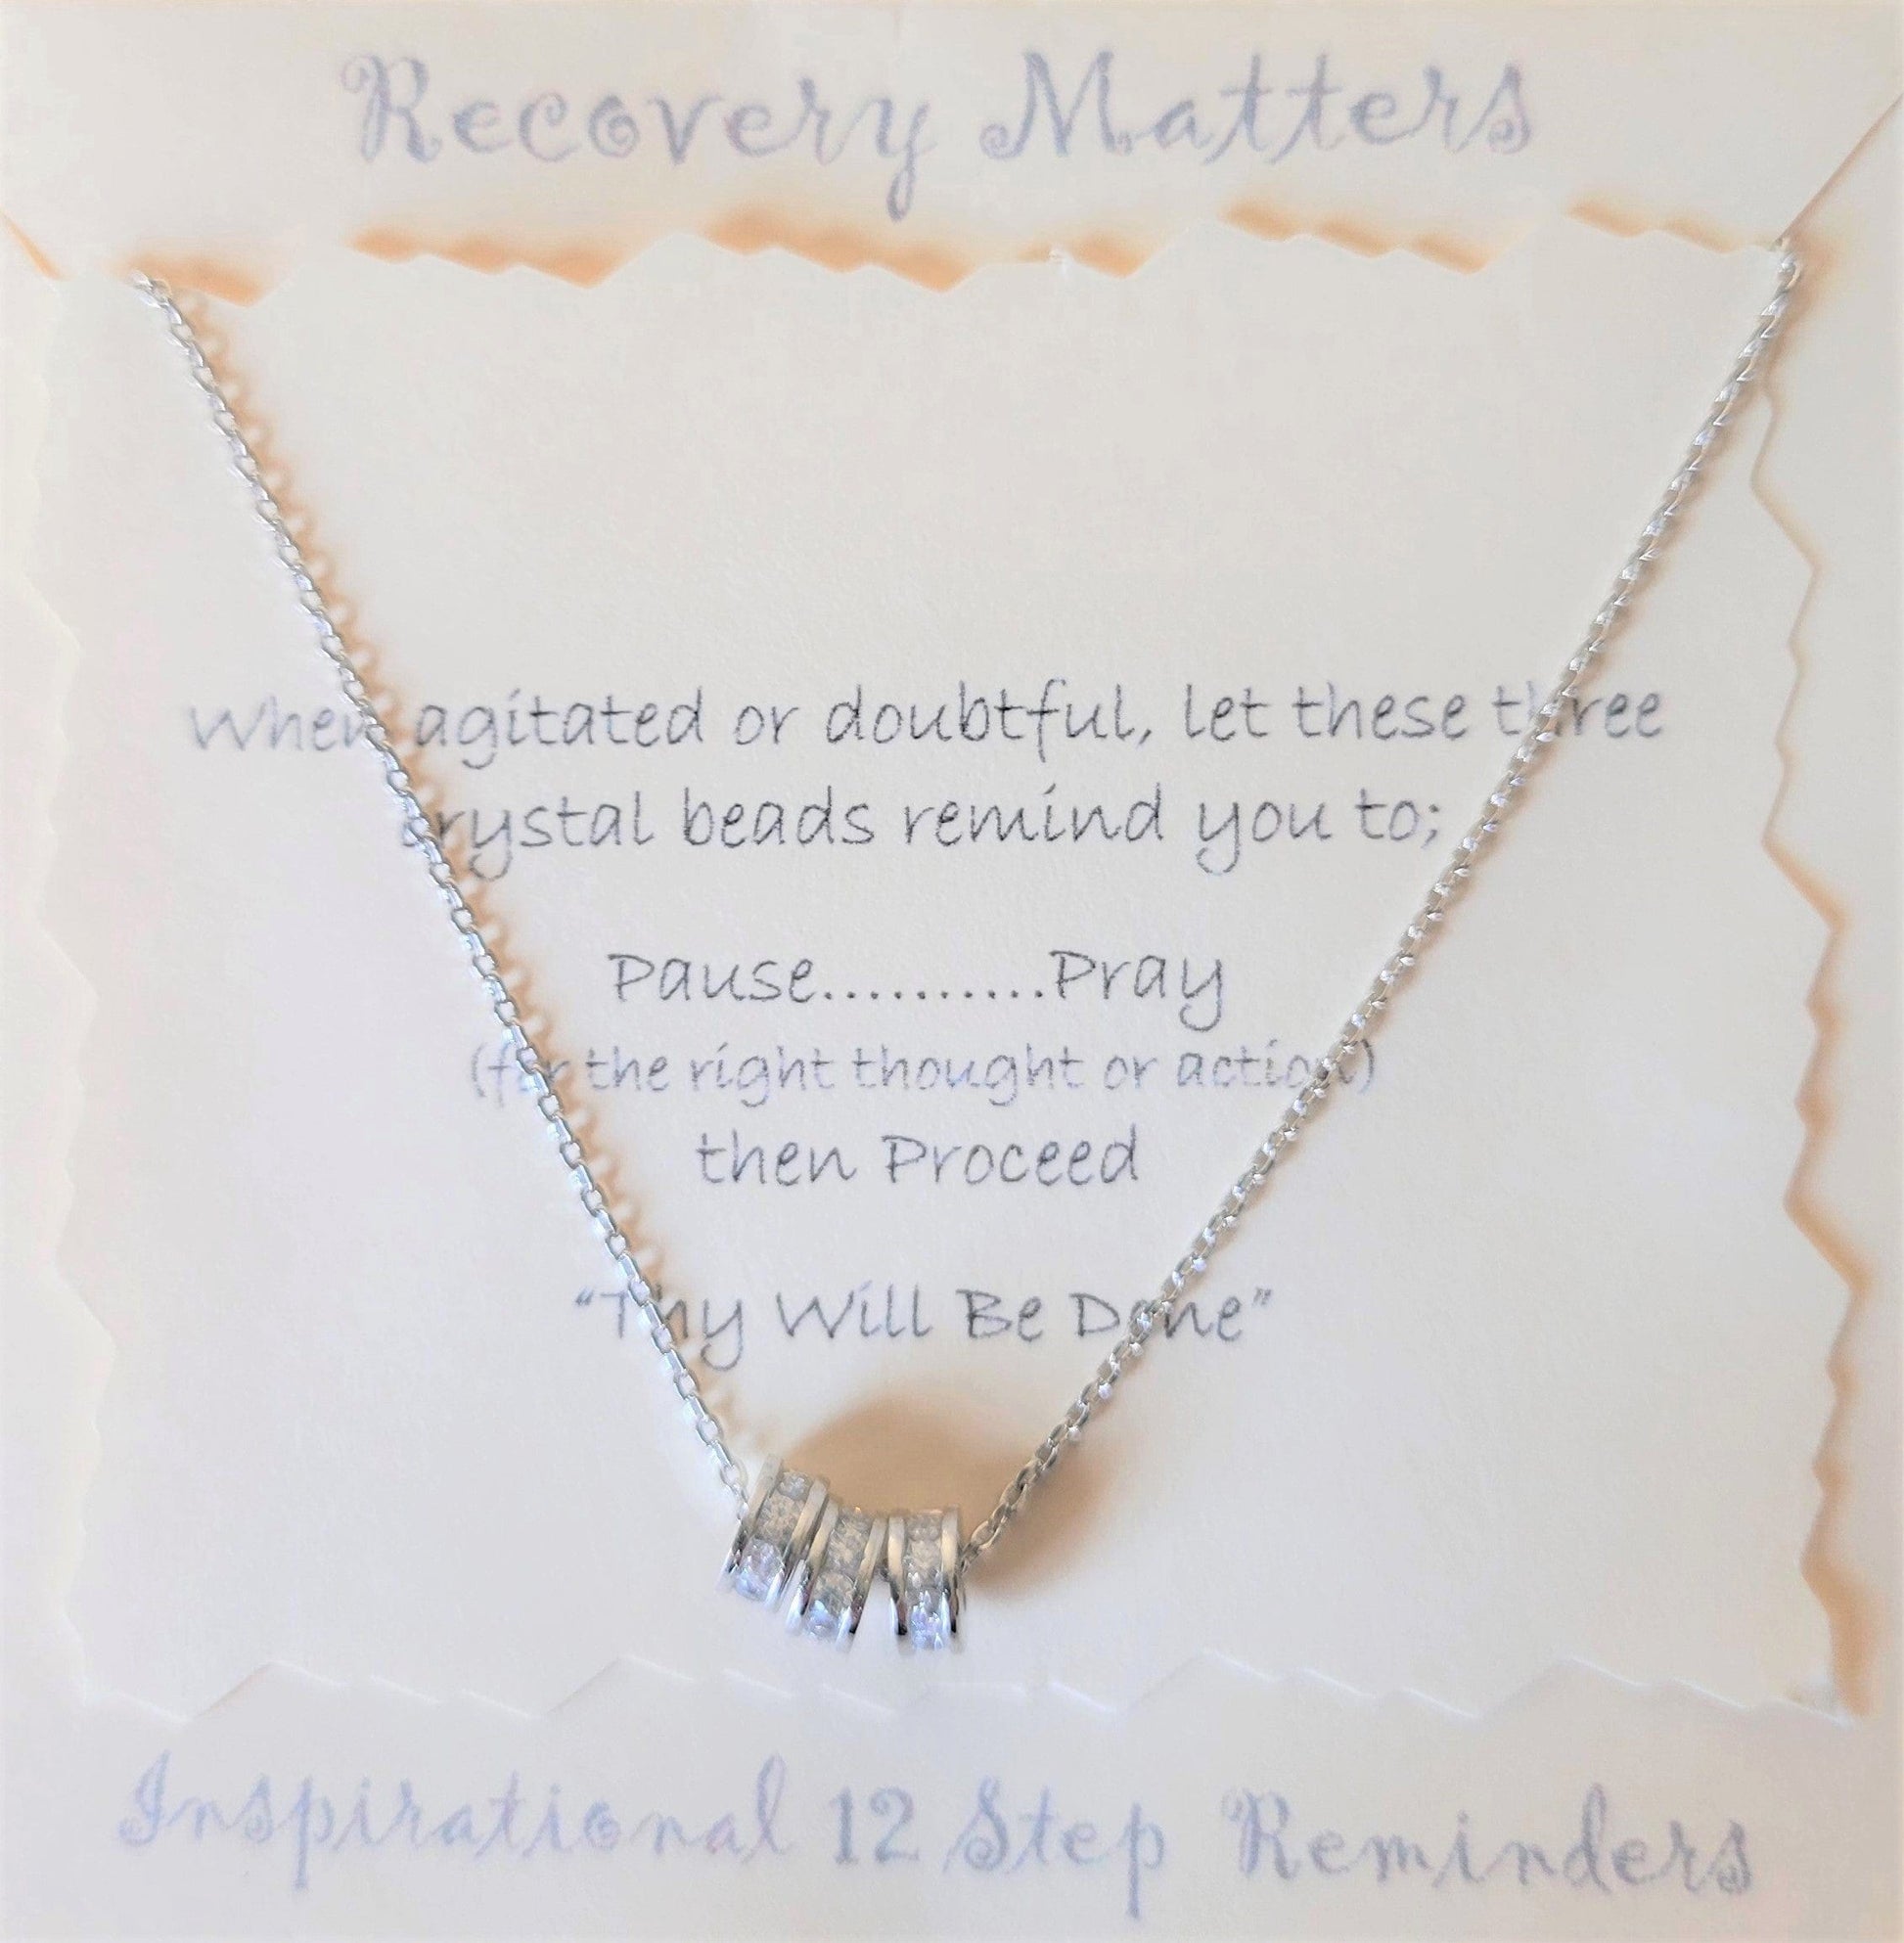 Pause, Pray, Proceed Silver Necklace By Recovery Matters